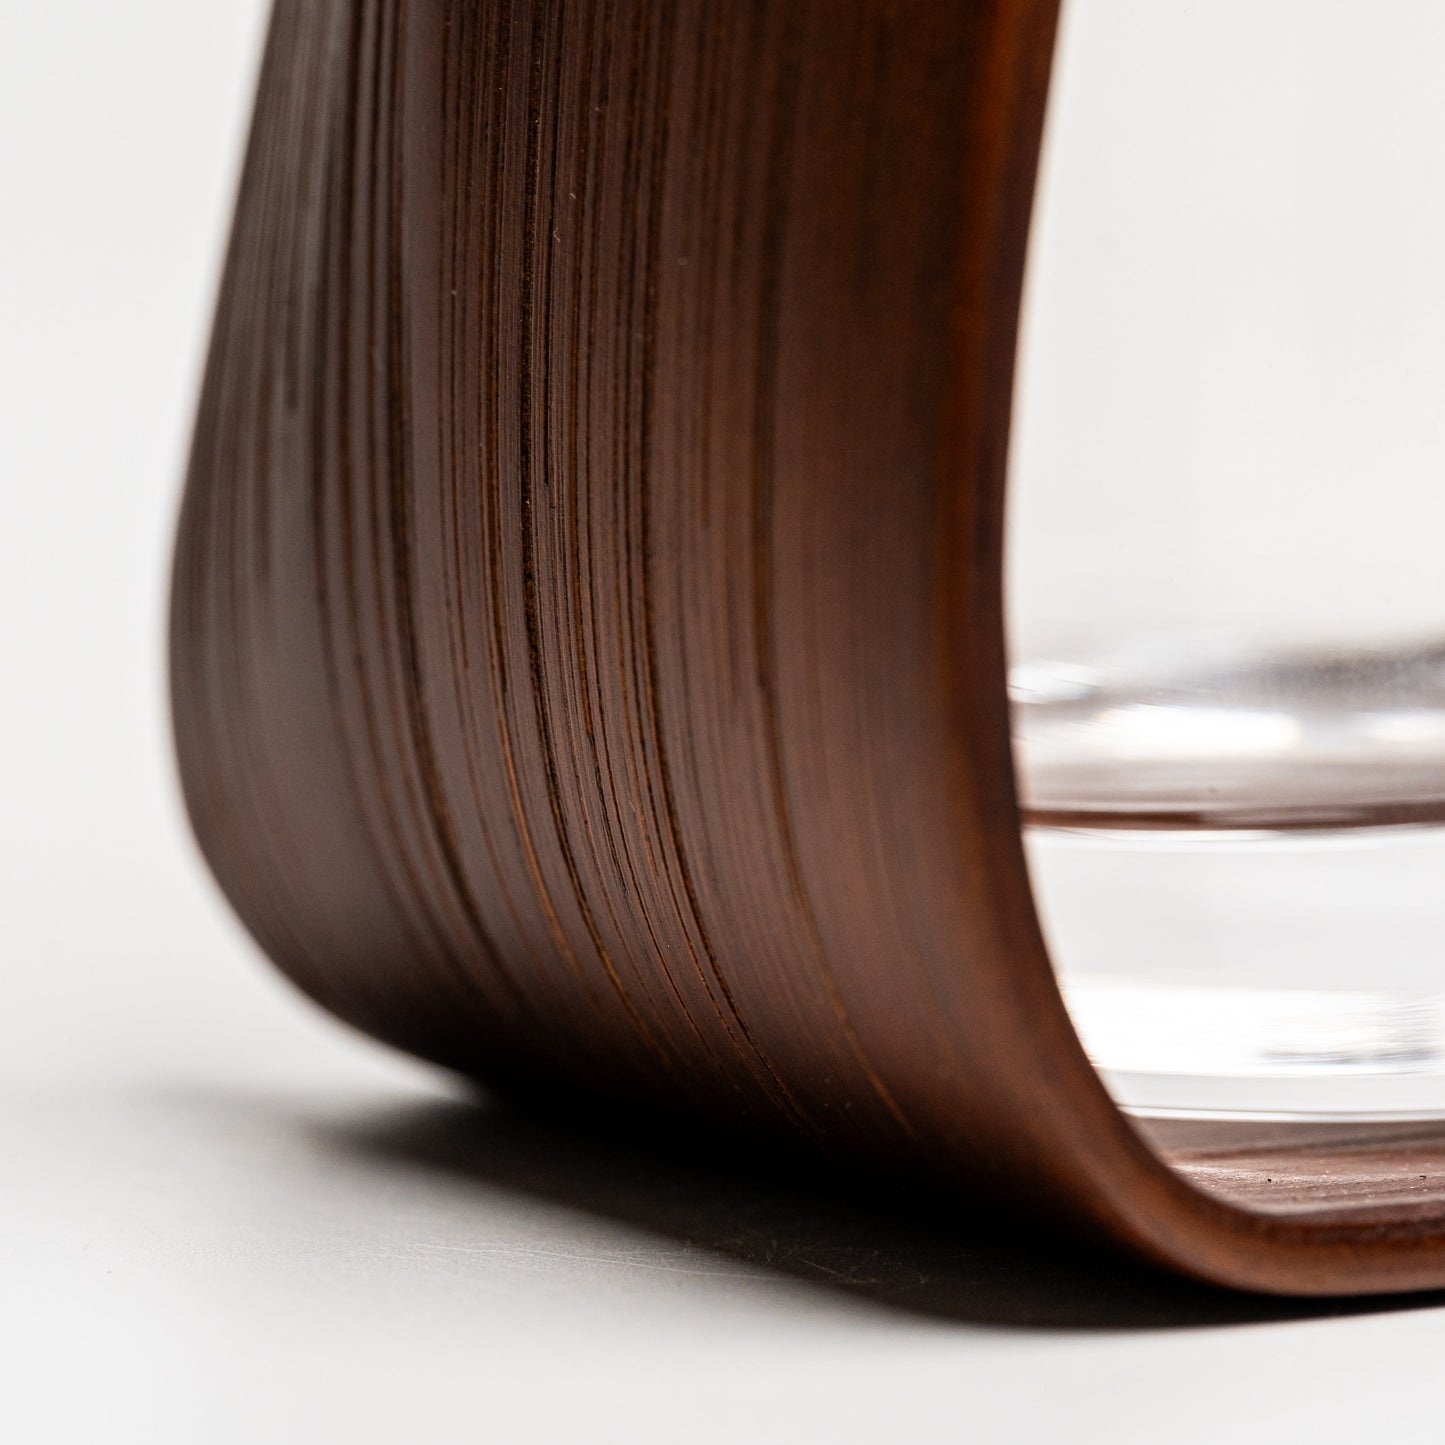 A close up of the bottom of an empty brown bamboo Noshi flower vase on a white background